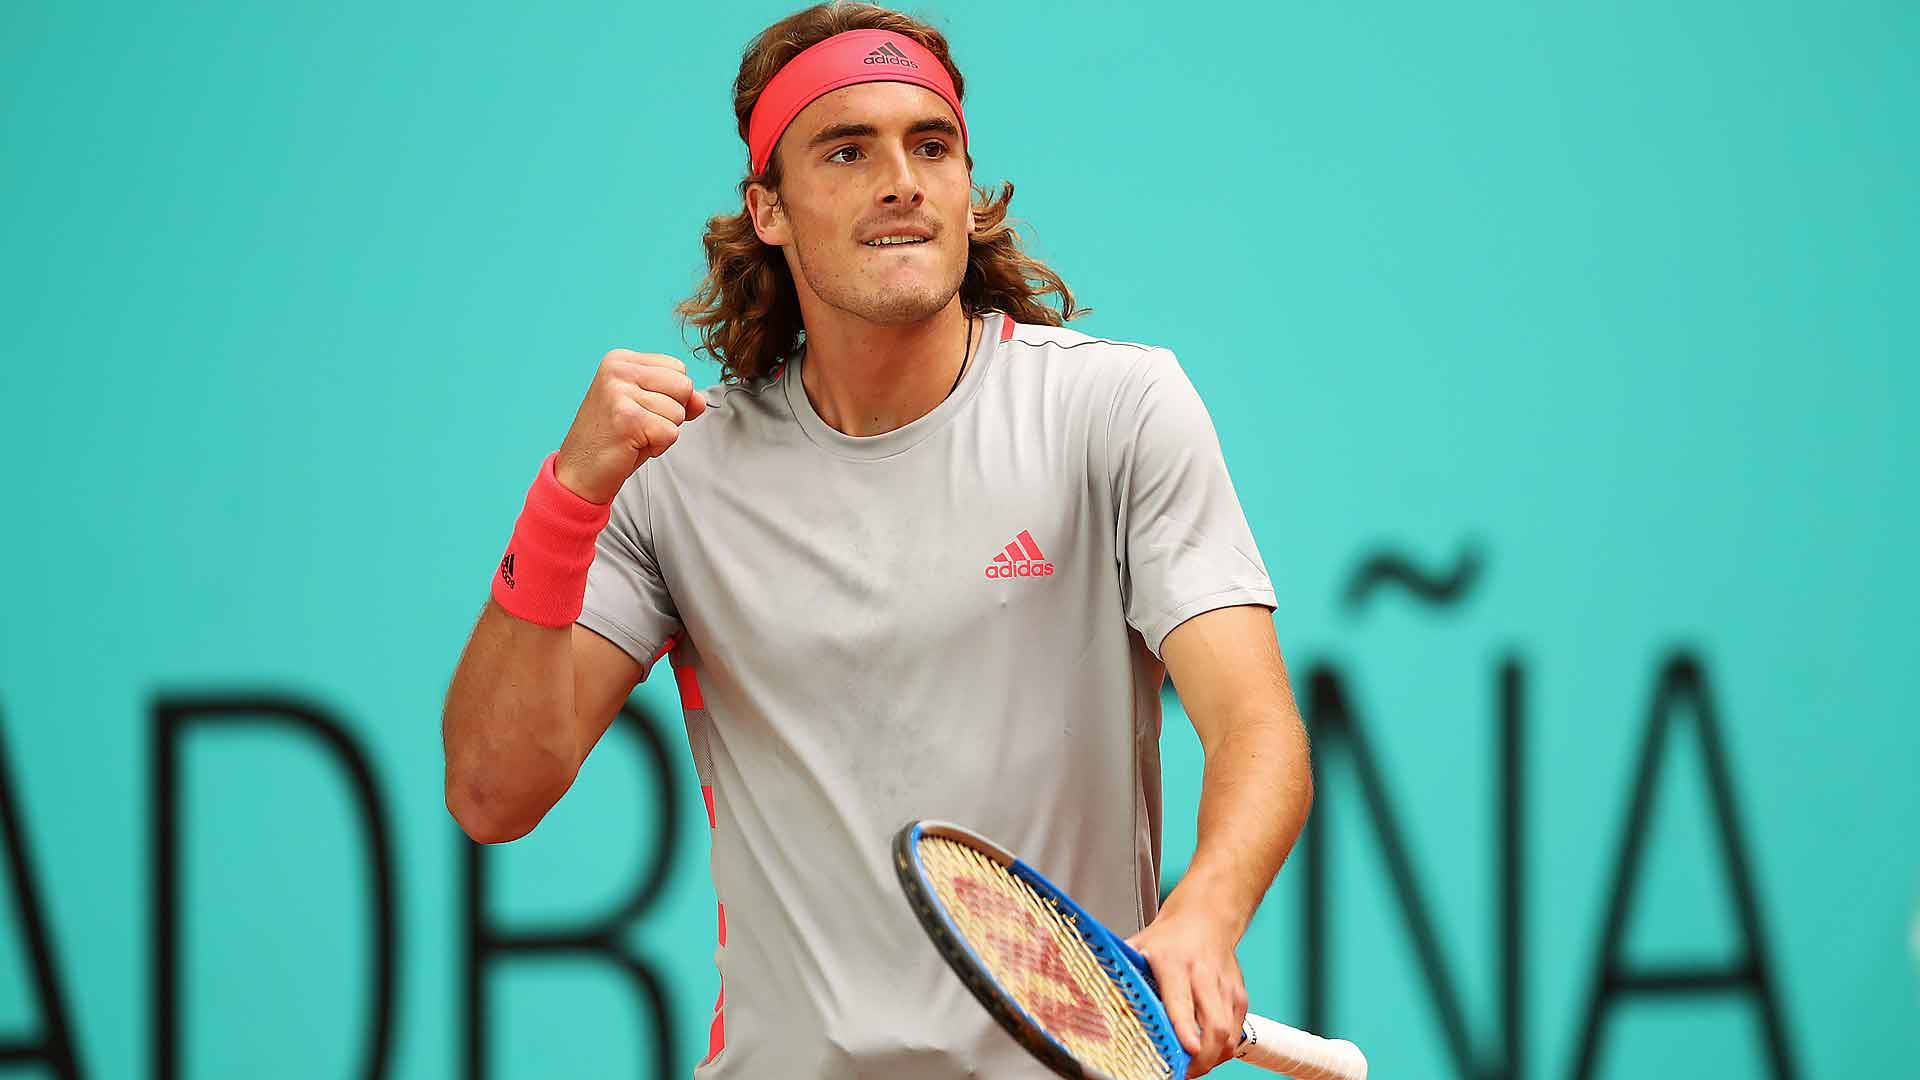 Stefanos Tsitsipas With Clenched Fist Background